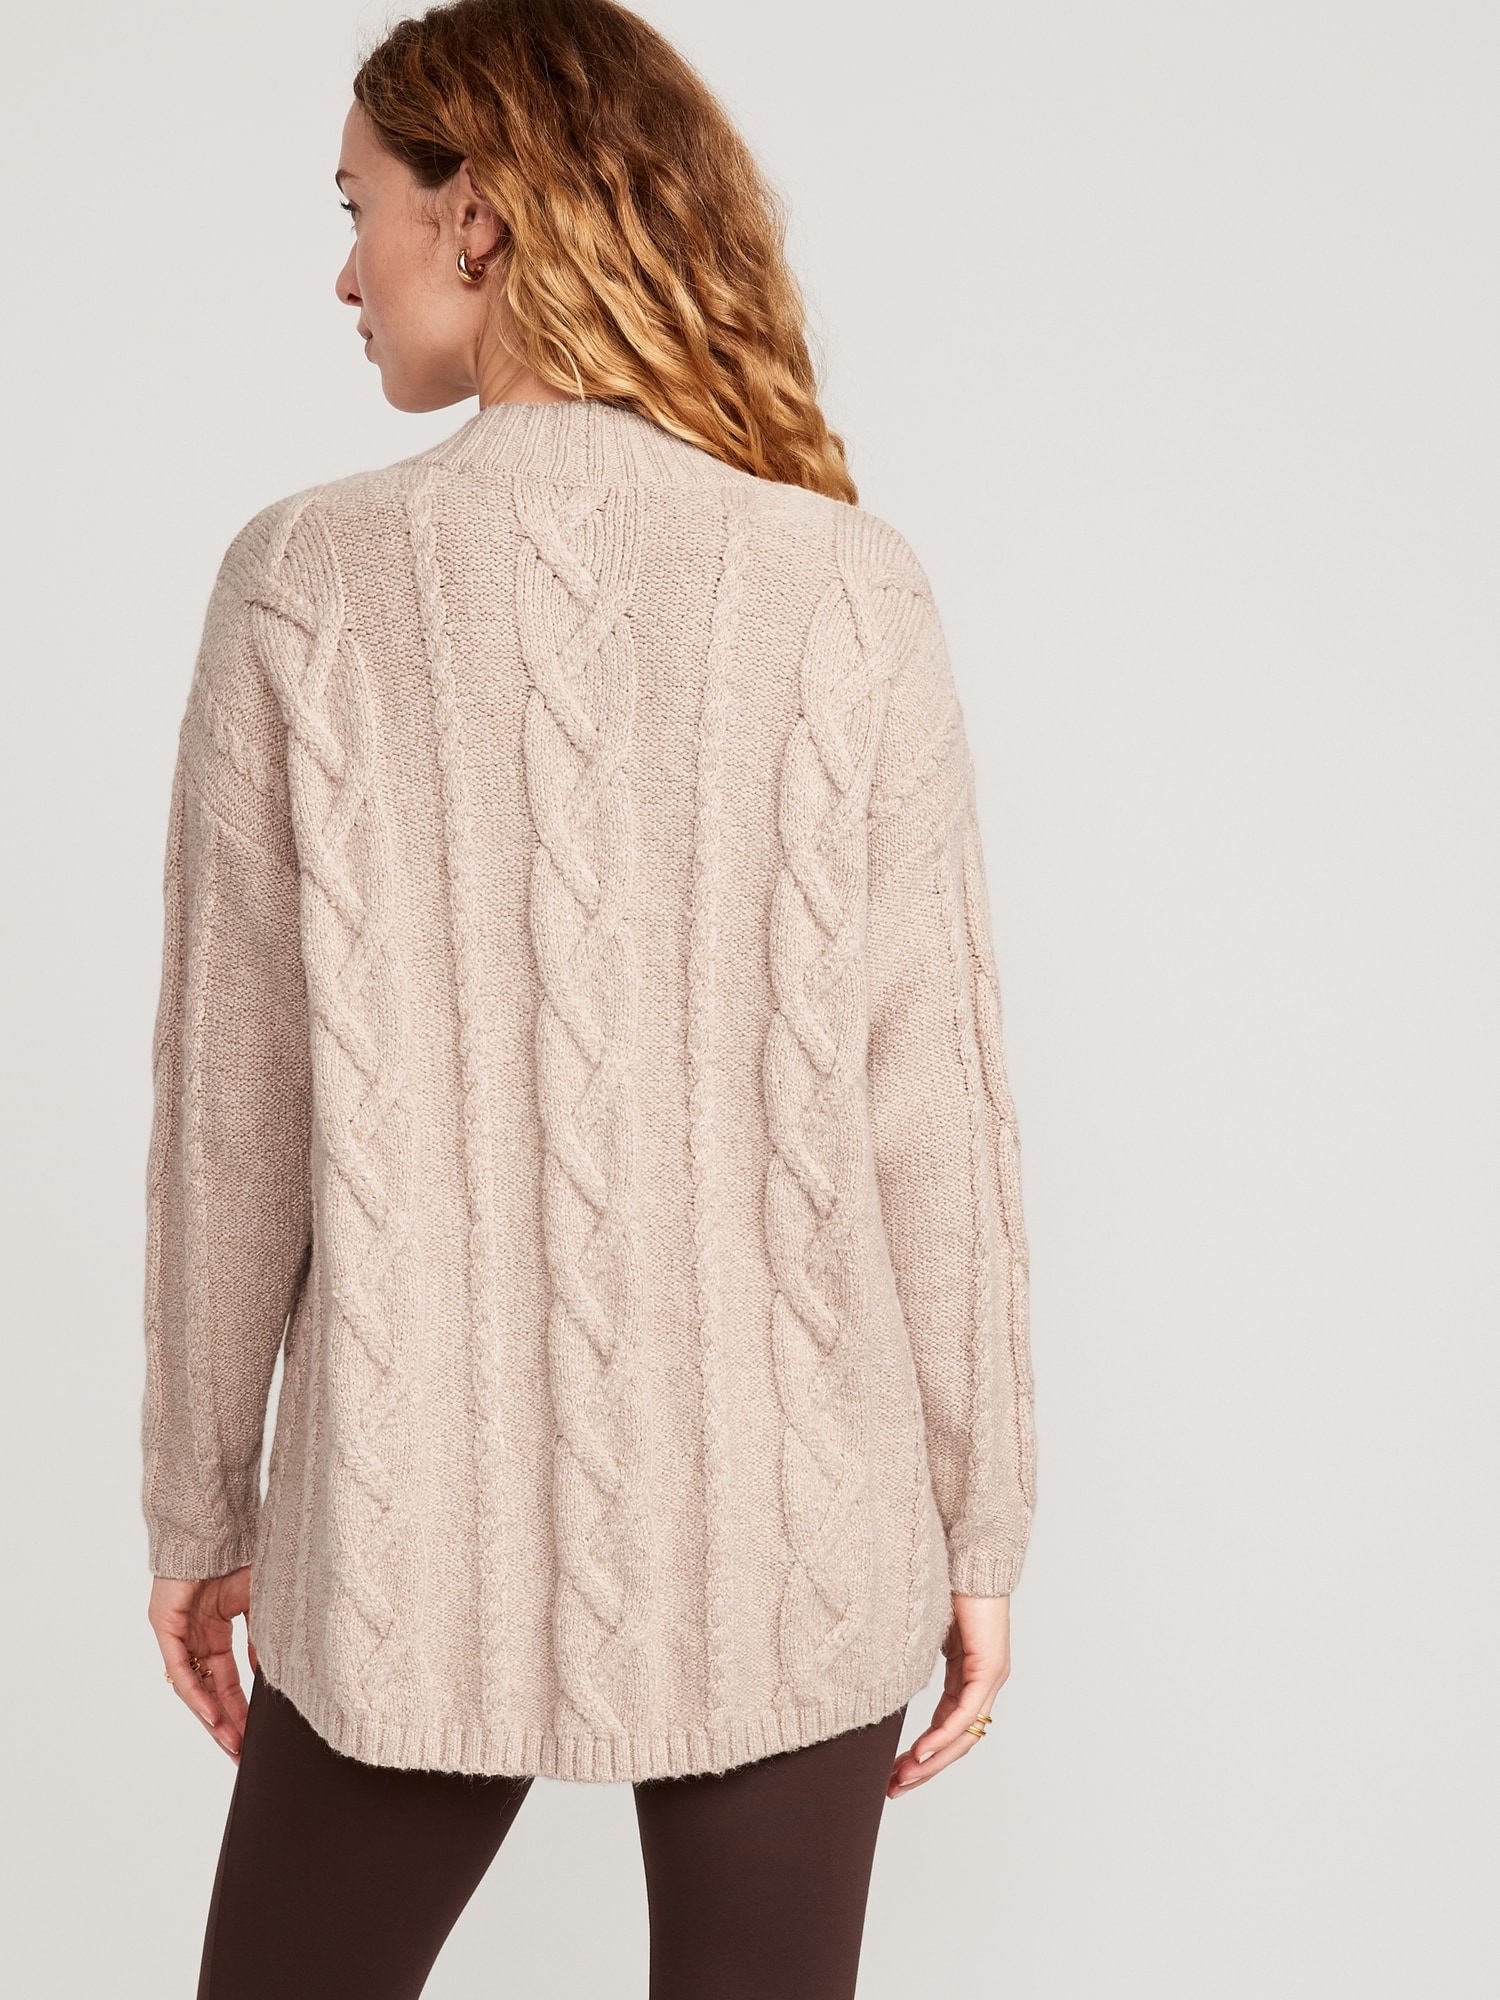 Erobring pause uld Oversized Chunky Cable-Knit Cardigan Sweater for Women | Old Navy